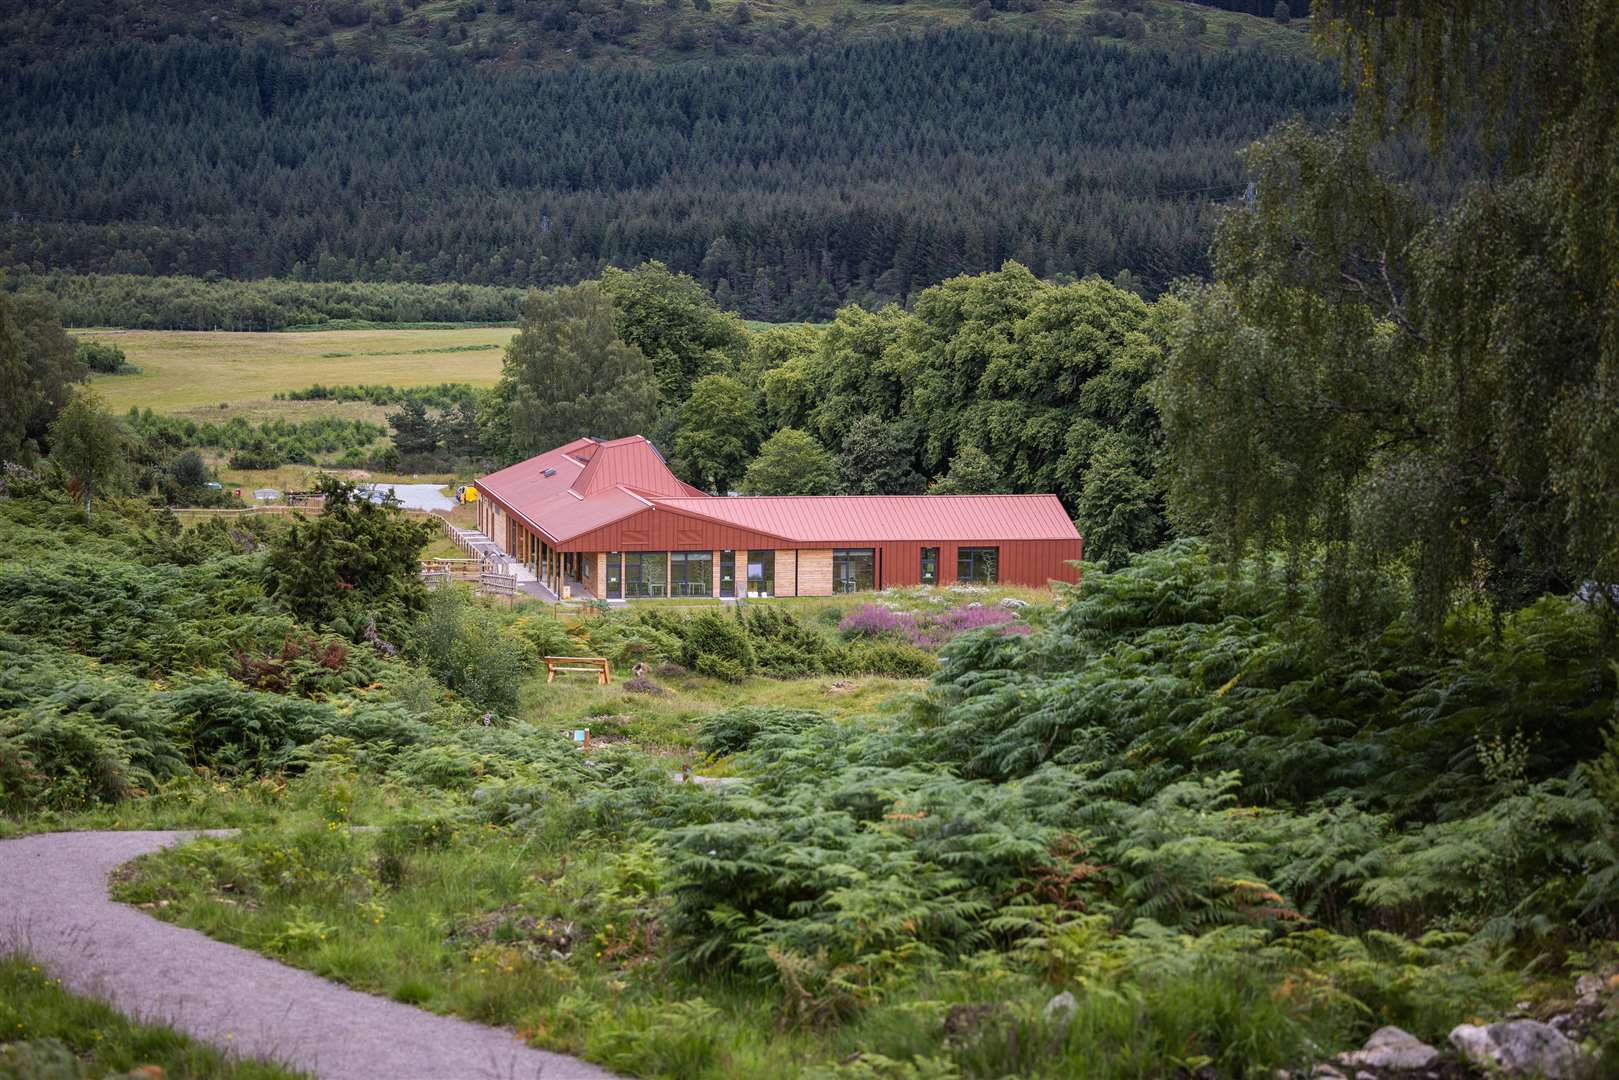 Trees For Life opened its rewilding centre at Dundreggan this spring. Picture: Paul Campbell.